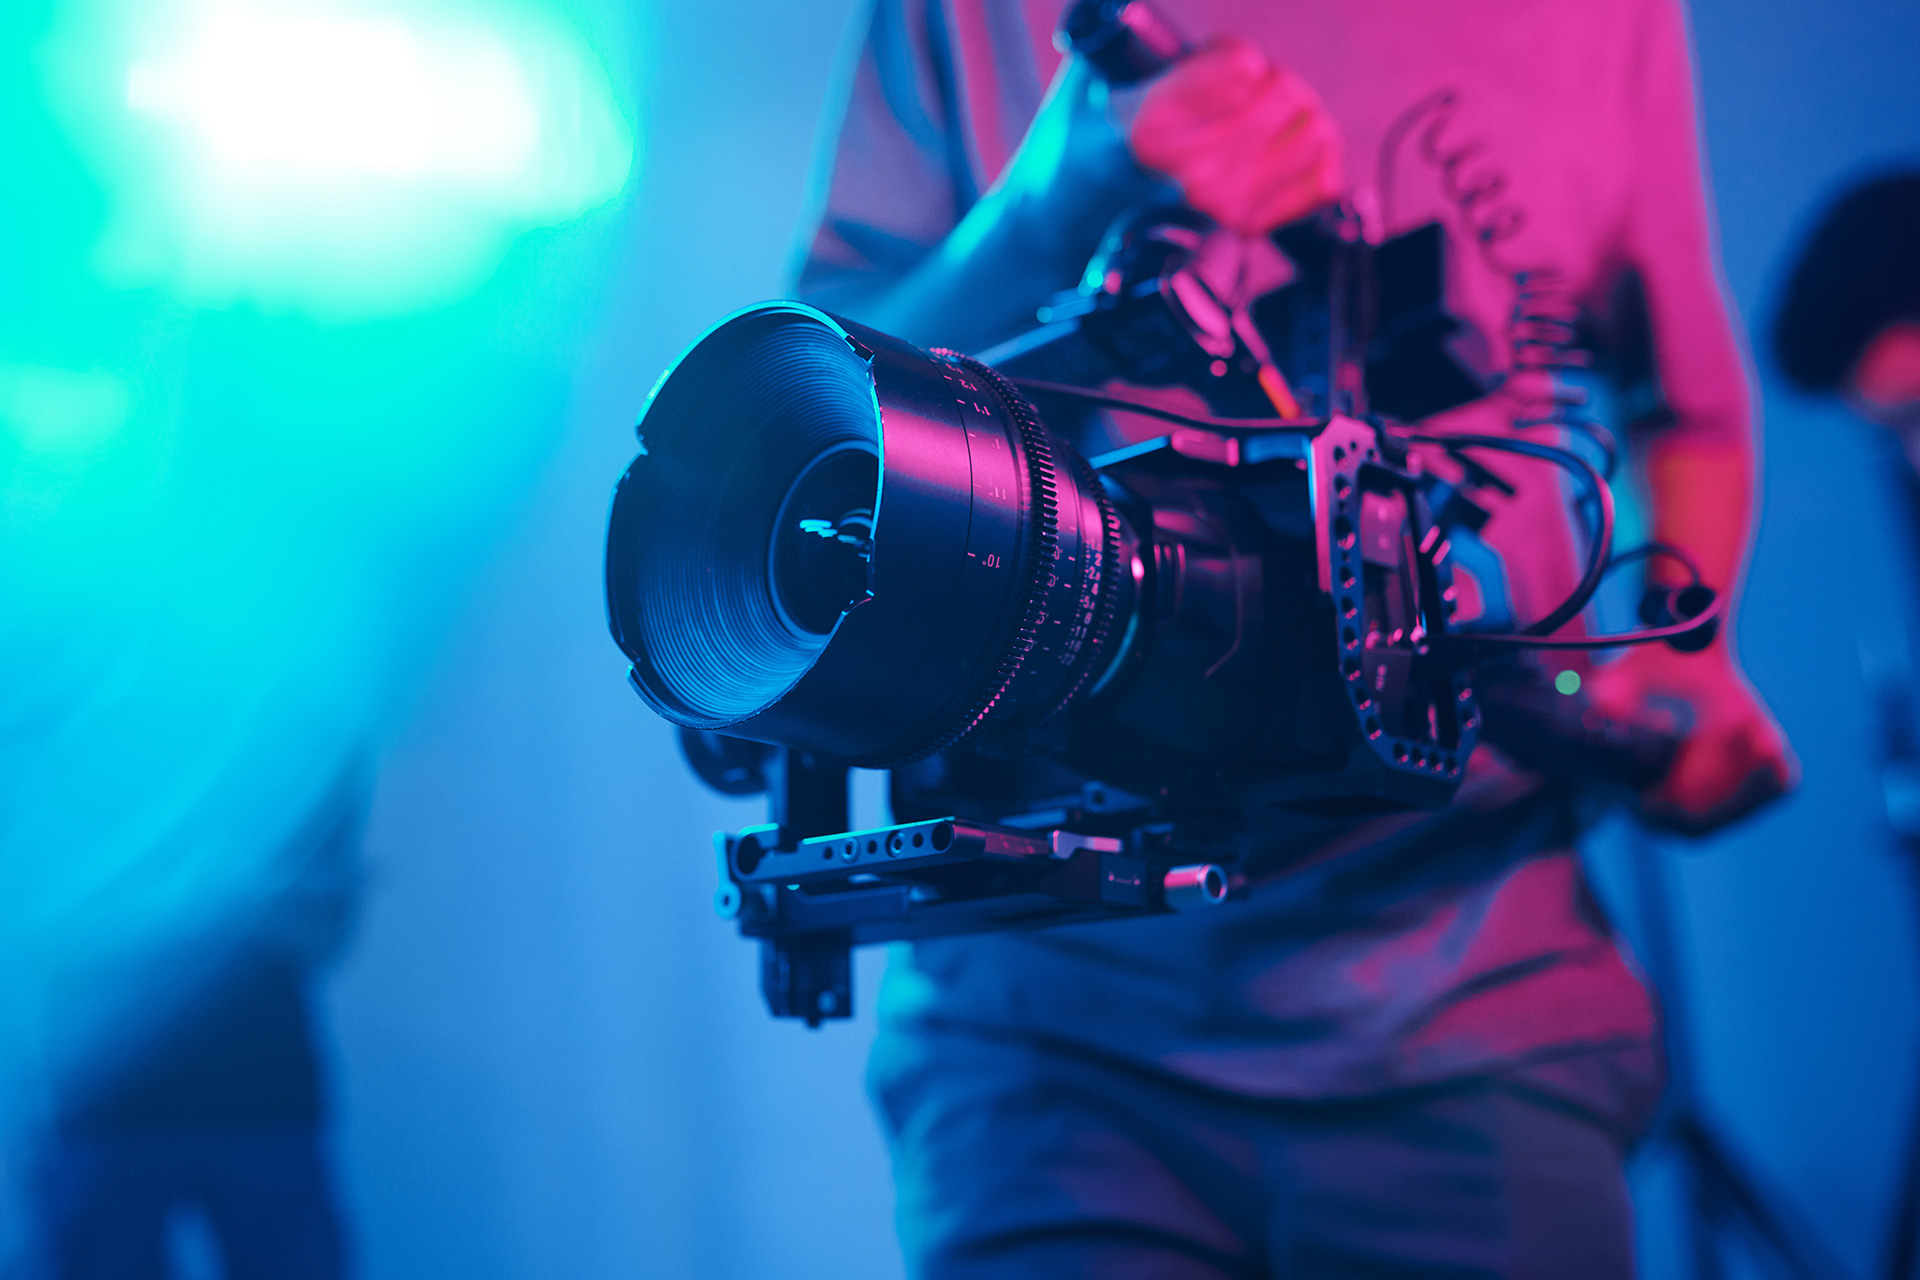 Why video content is standing at the forefront of social media strategies